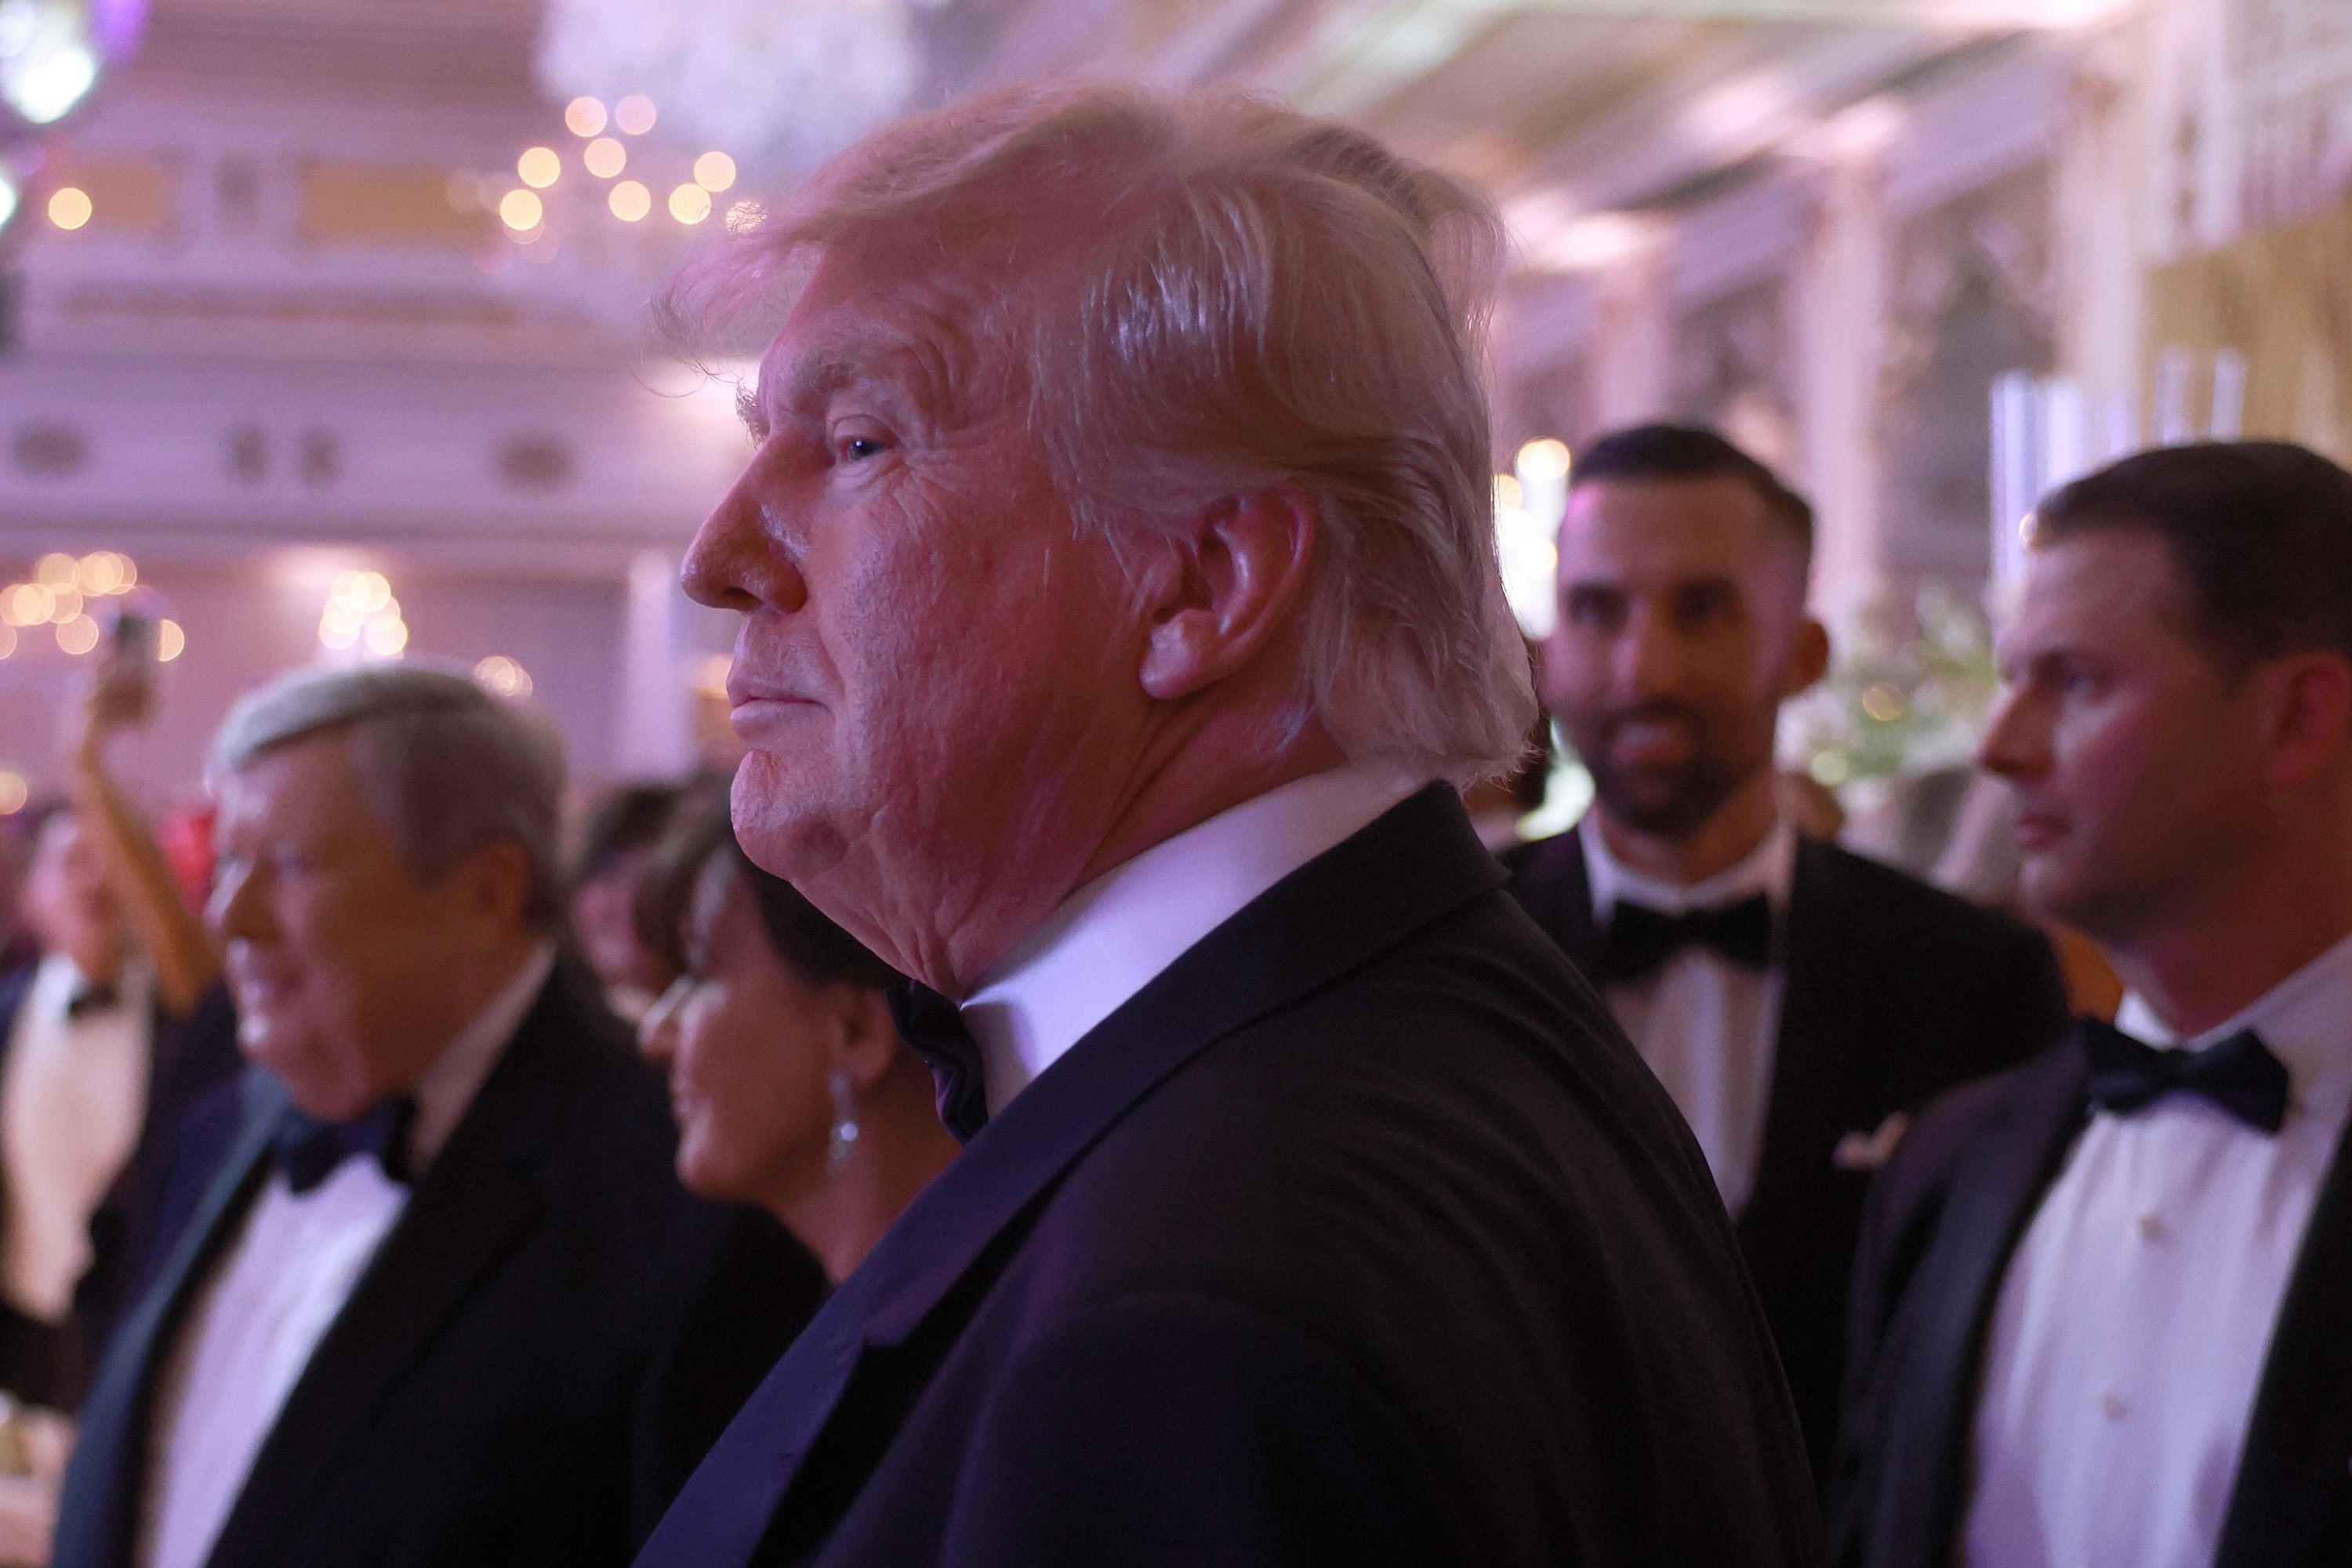 A side view of Trump's face. He's wearing a tuxedo and glowering.